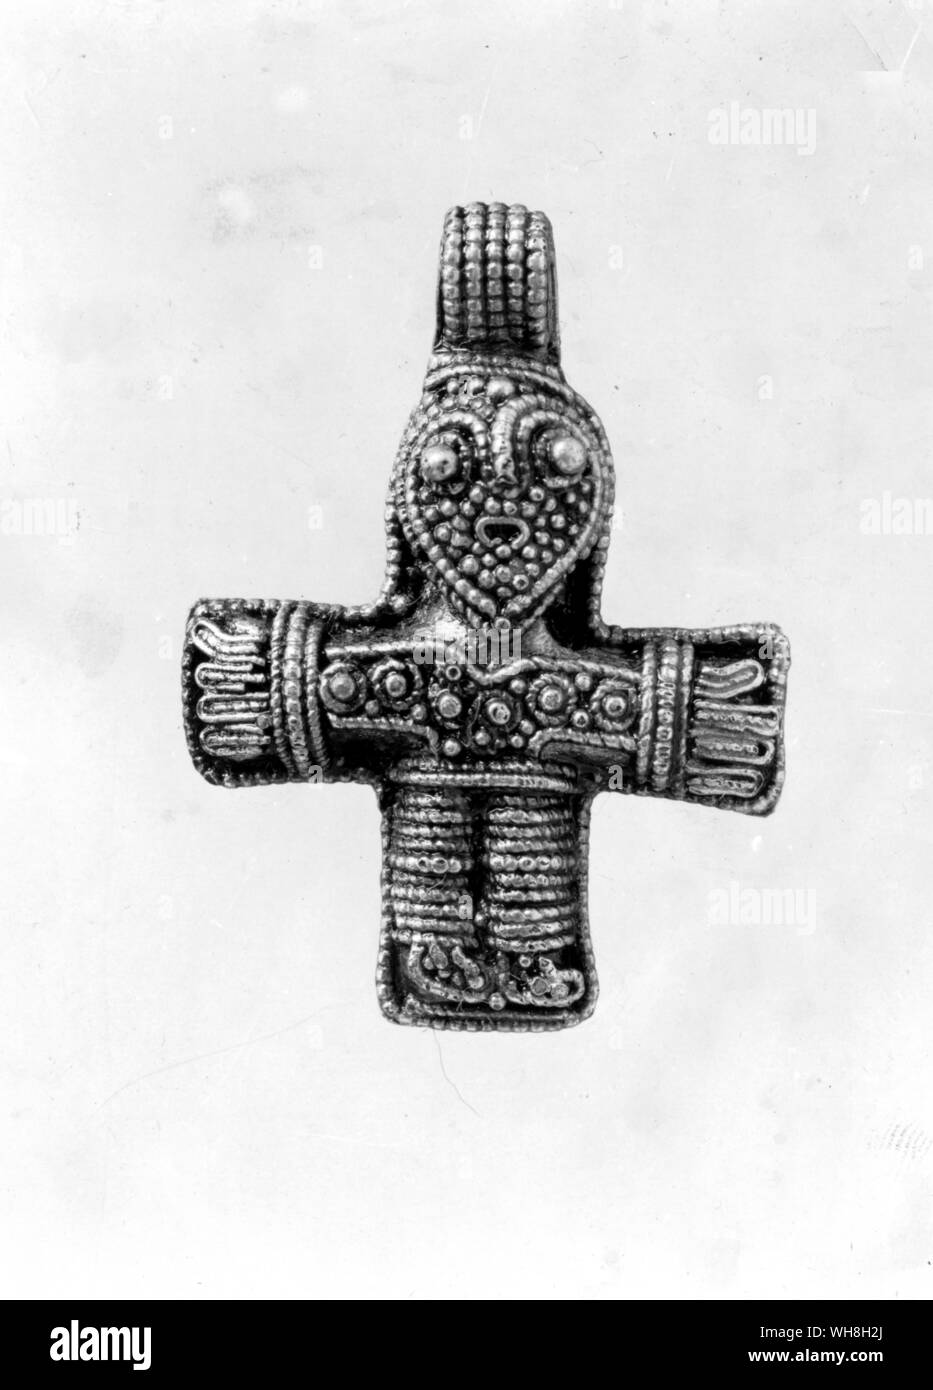 Silver-gilt pendant cross of the tenth century. The Opening of the World by David Divine, page 69. Stock Photo